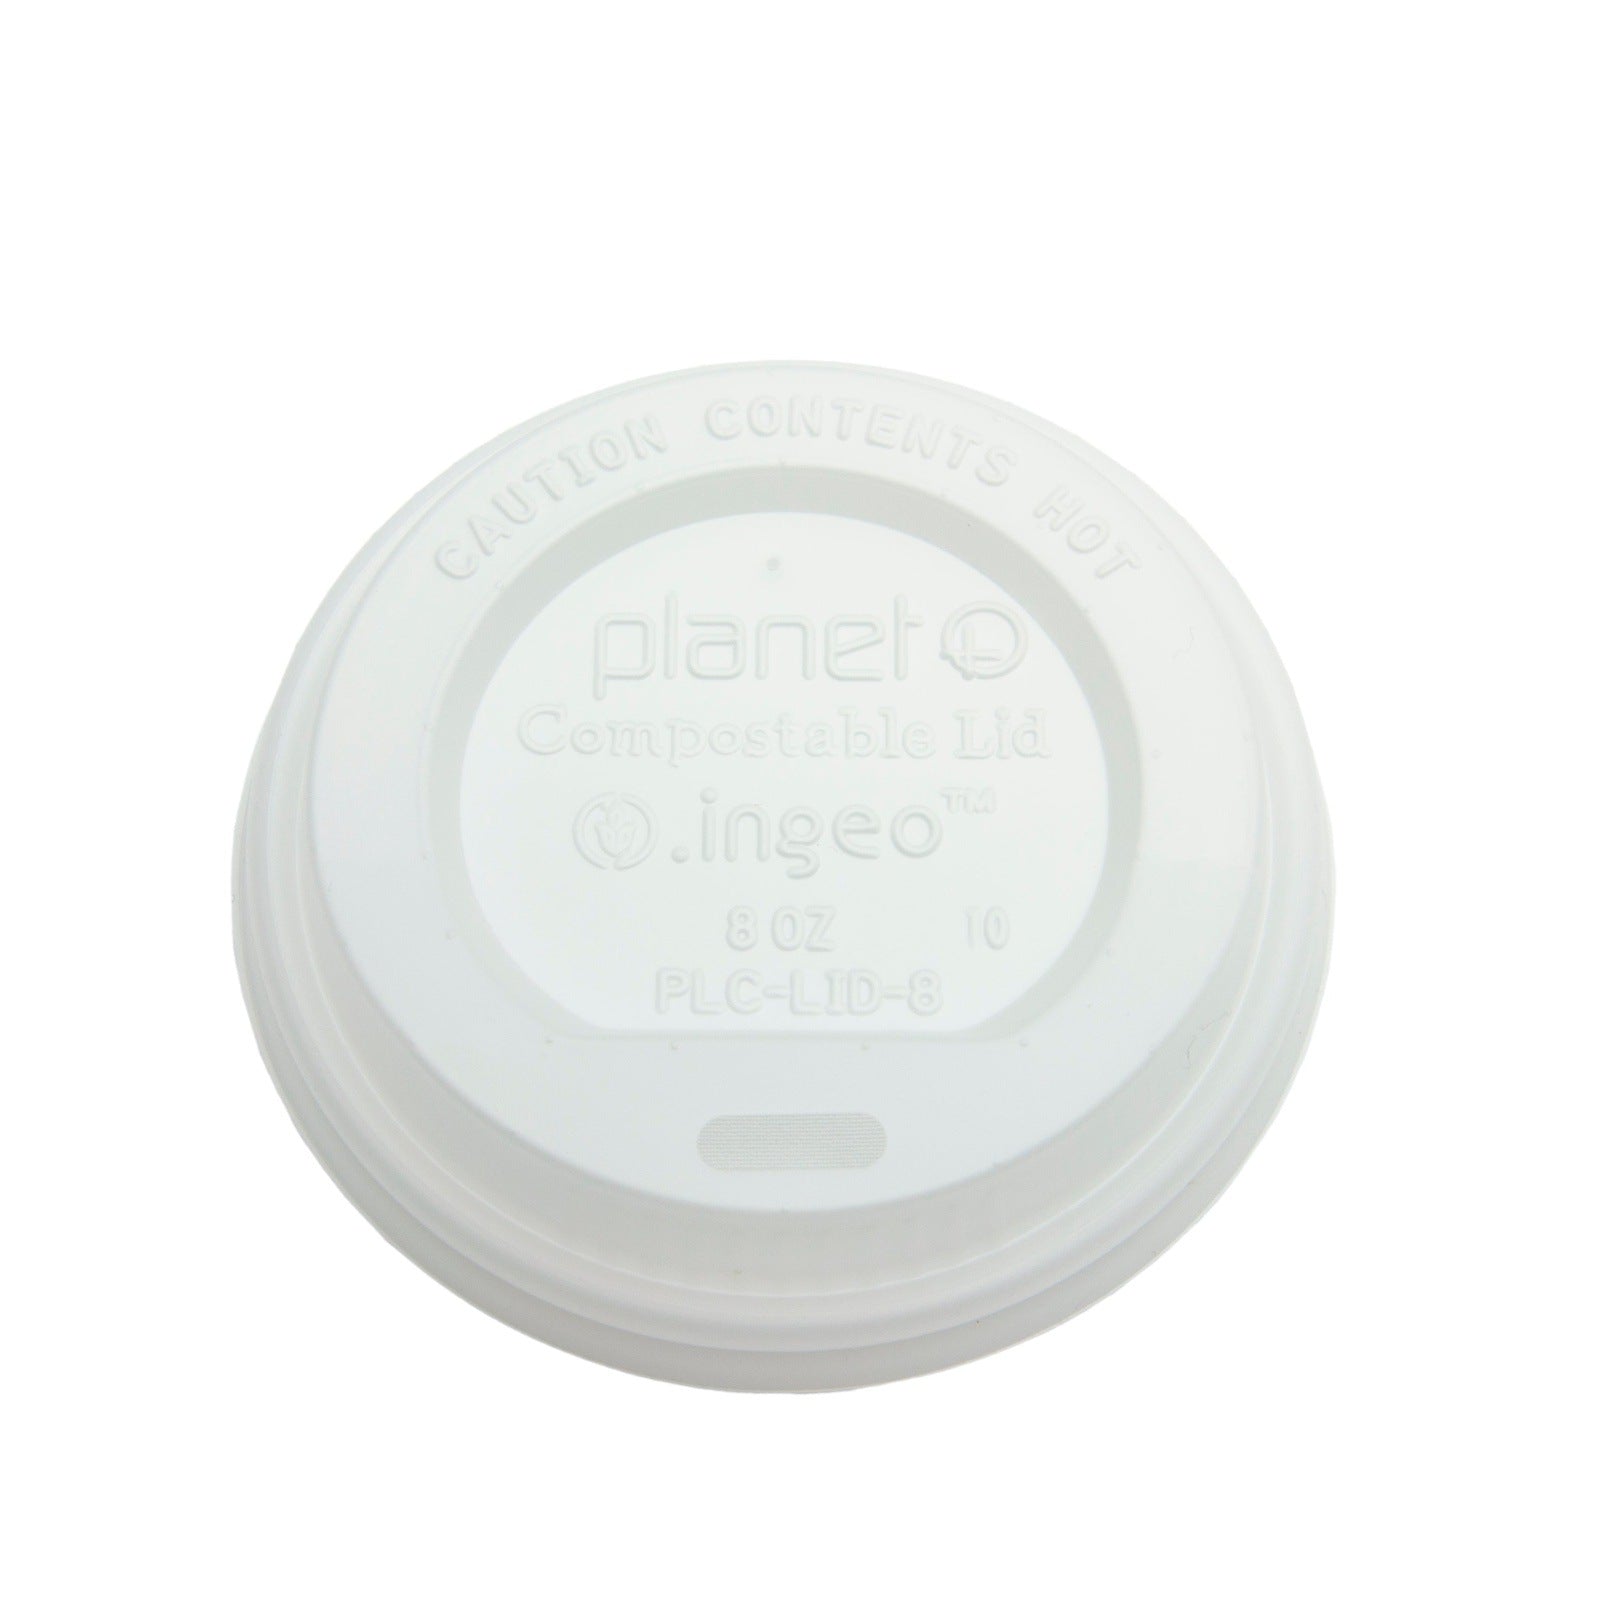 8 Oz Single & Double-Wall Hot Cup Lids, 1000-Count Case